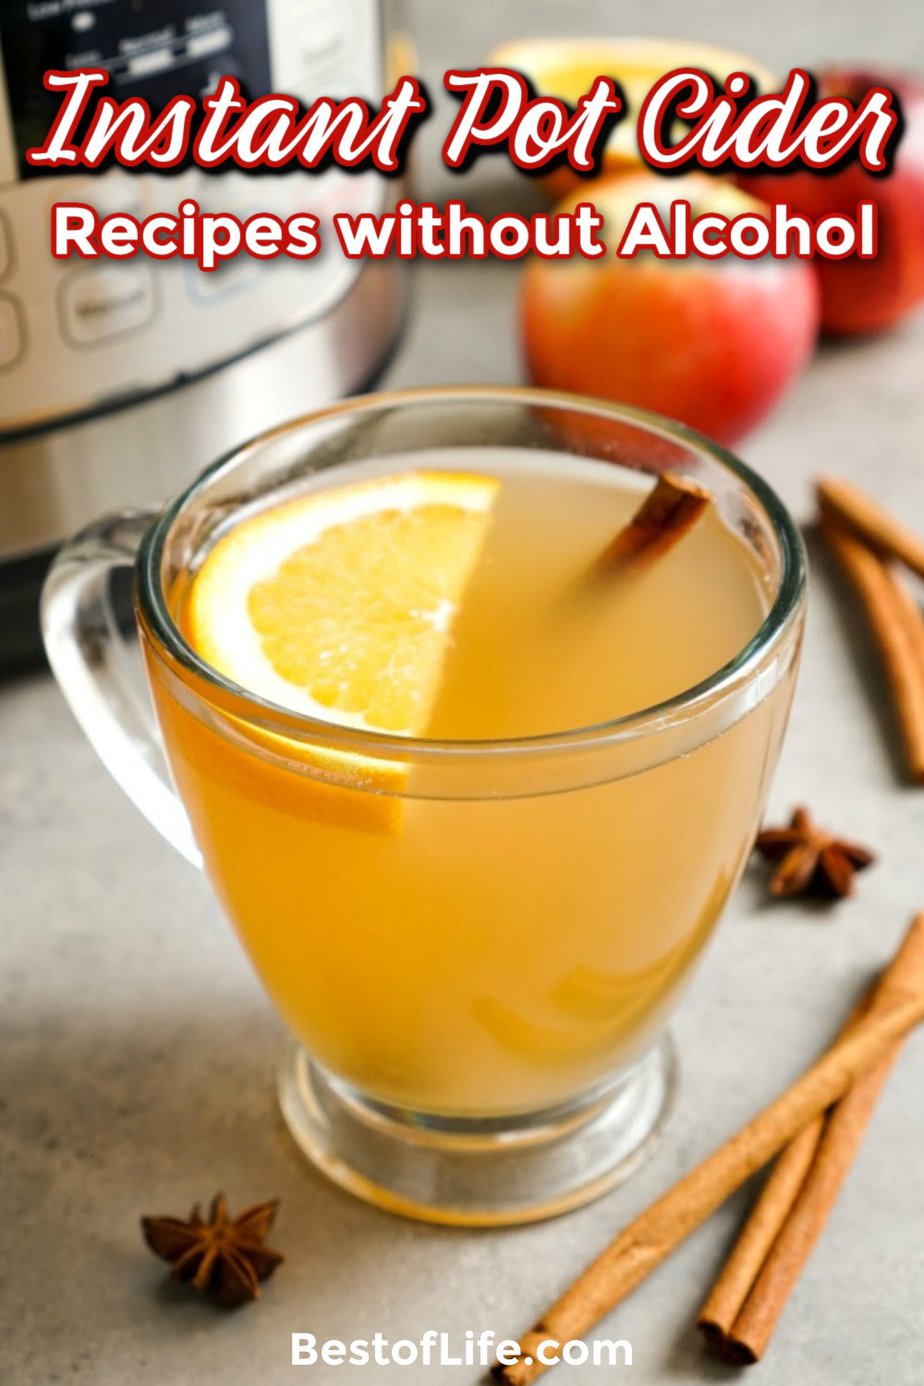 All it takes is a few ingredients to make the best Instant Pot cider recipes. You can then enjoy a fresh, warm glass of cider as you cuddle up by the fire. These recipes are perfect for parties for kids, too! Instant Pot Drink Recipes | Instant Pot Fall Recipes | Recipes for Fall | Homemade Cider Recipes | Hot Drink Recipes #cider #instantpot